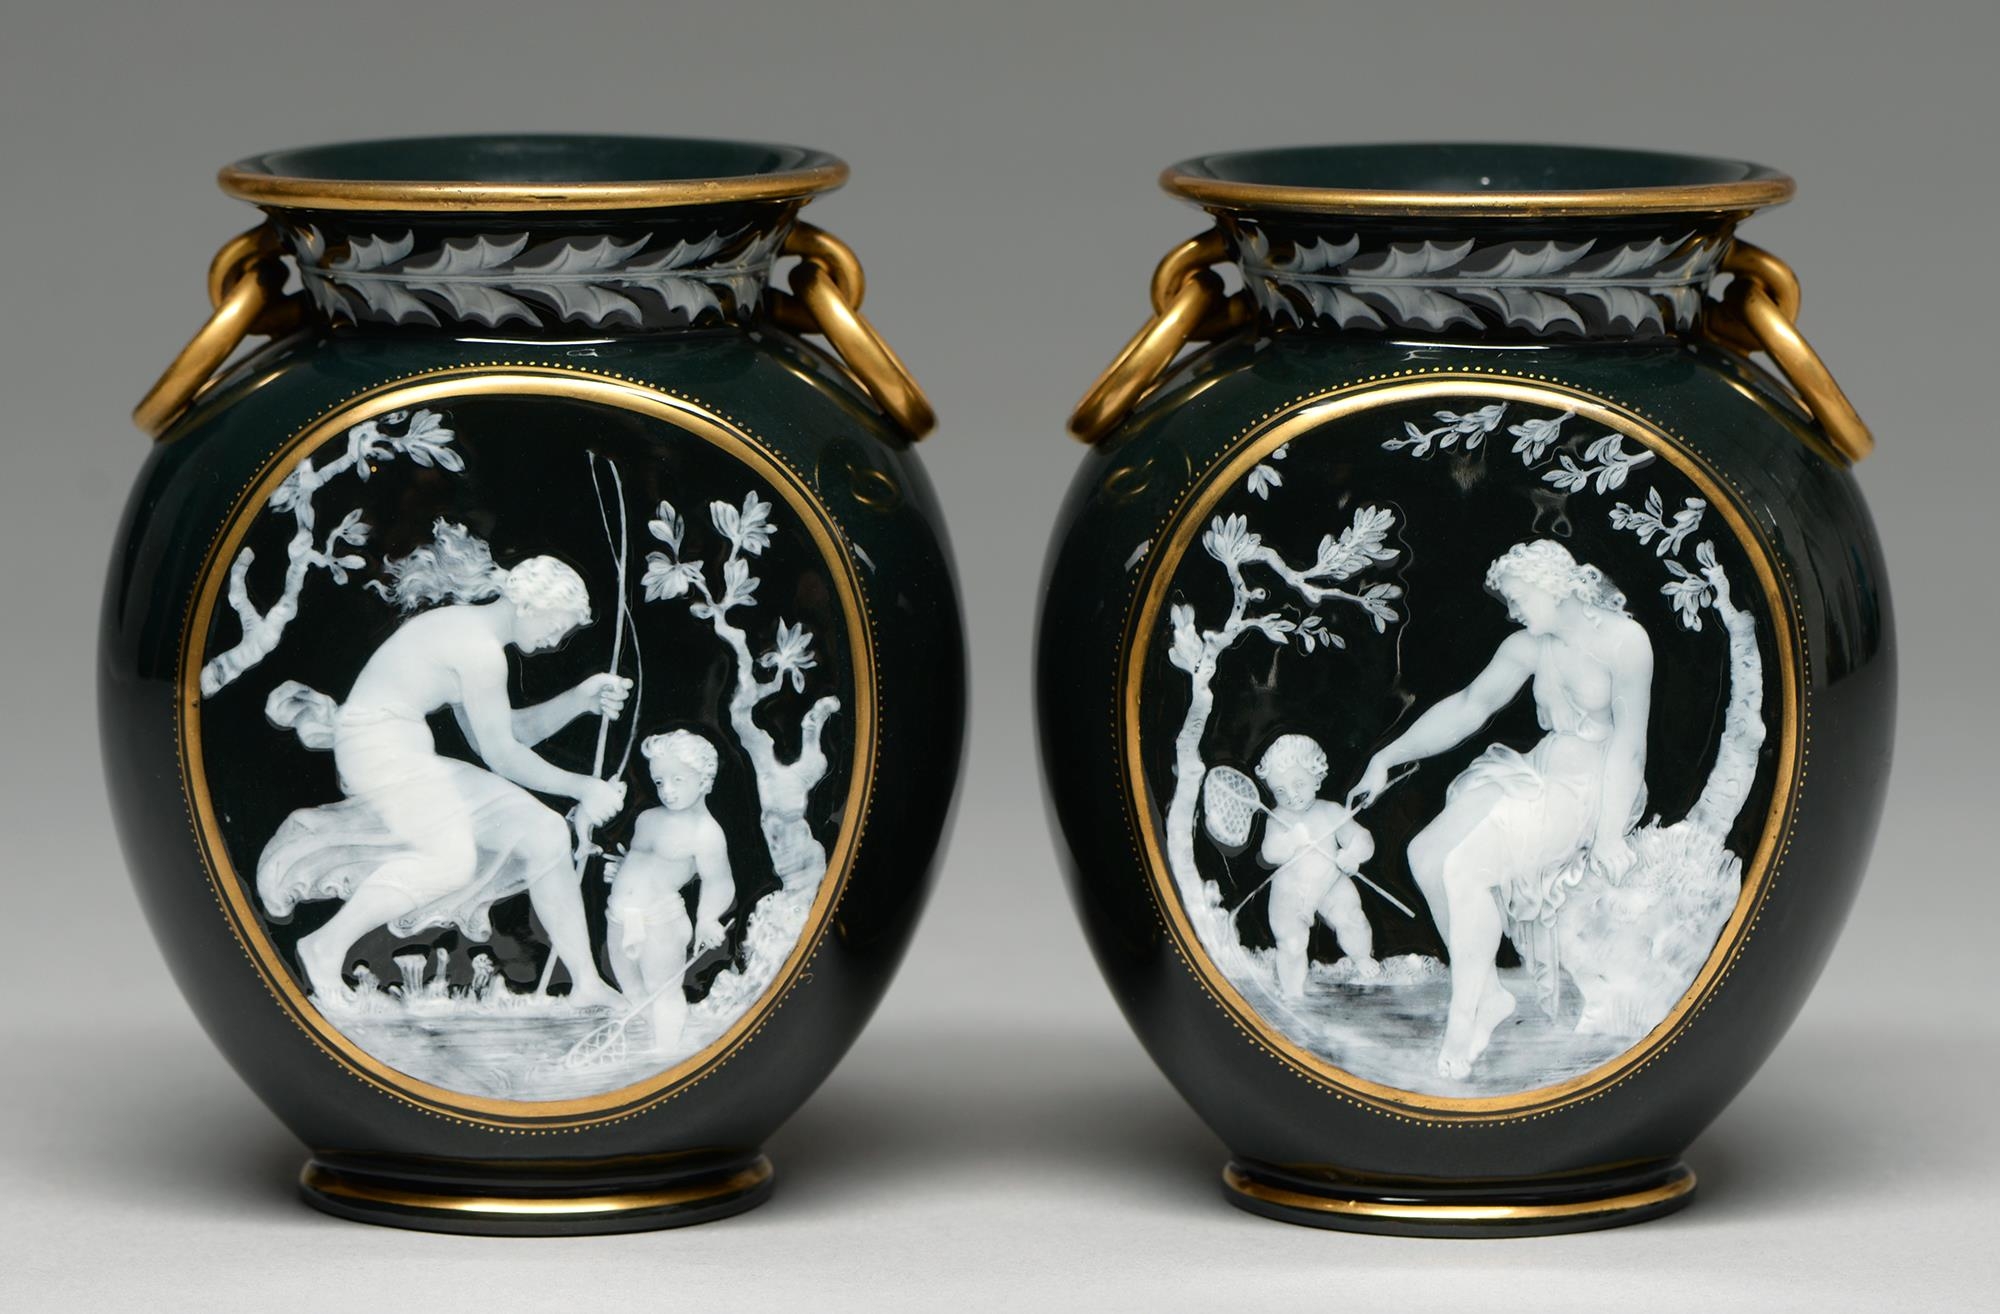 A pair of Brown-Westhead, Moore & Co pate sur pate style vases, c1890, with a nymph instructing